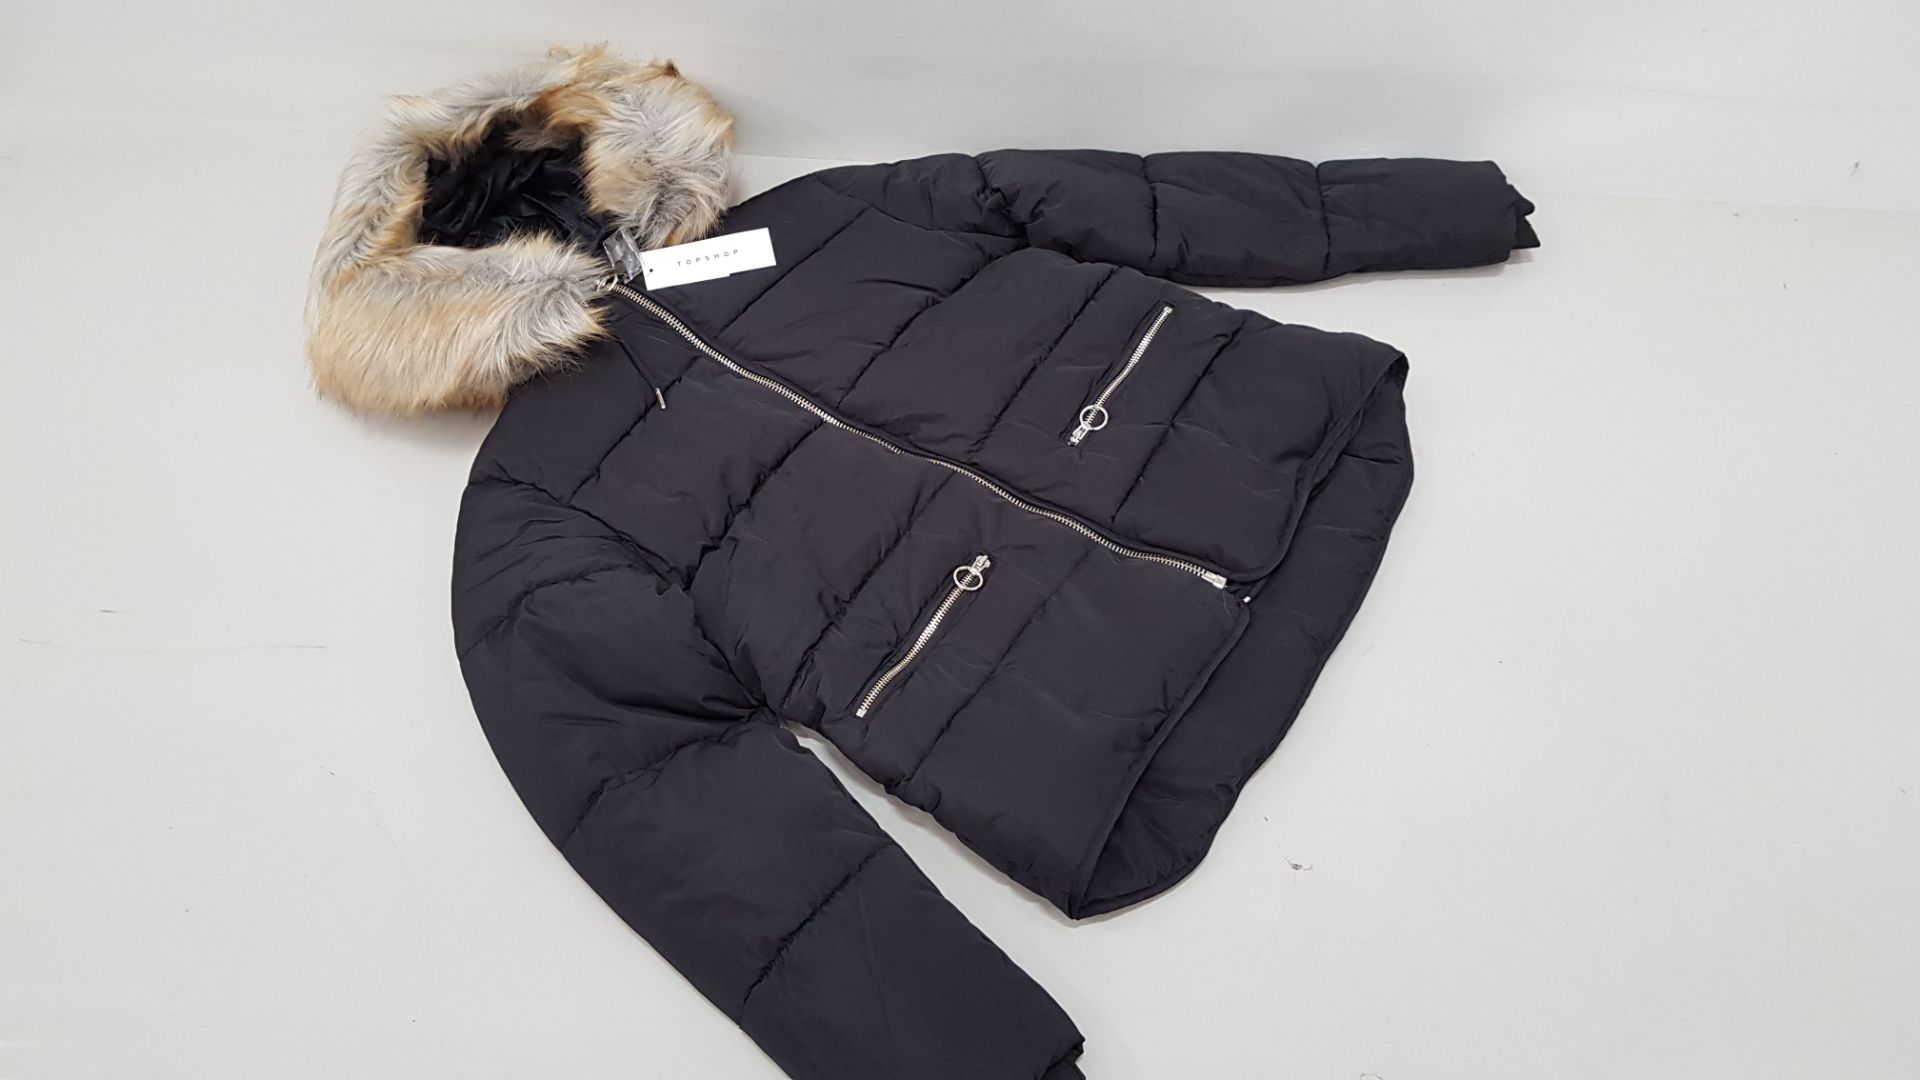 8 X BRAND NEW TOPSHOP NAVY FAUX FUR HOODED PUFFER JACKETS UK SIZE 14 RRP £65.00 (TOTAL RRP £520.00)